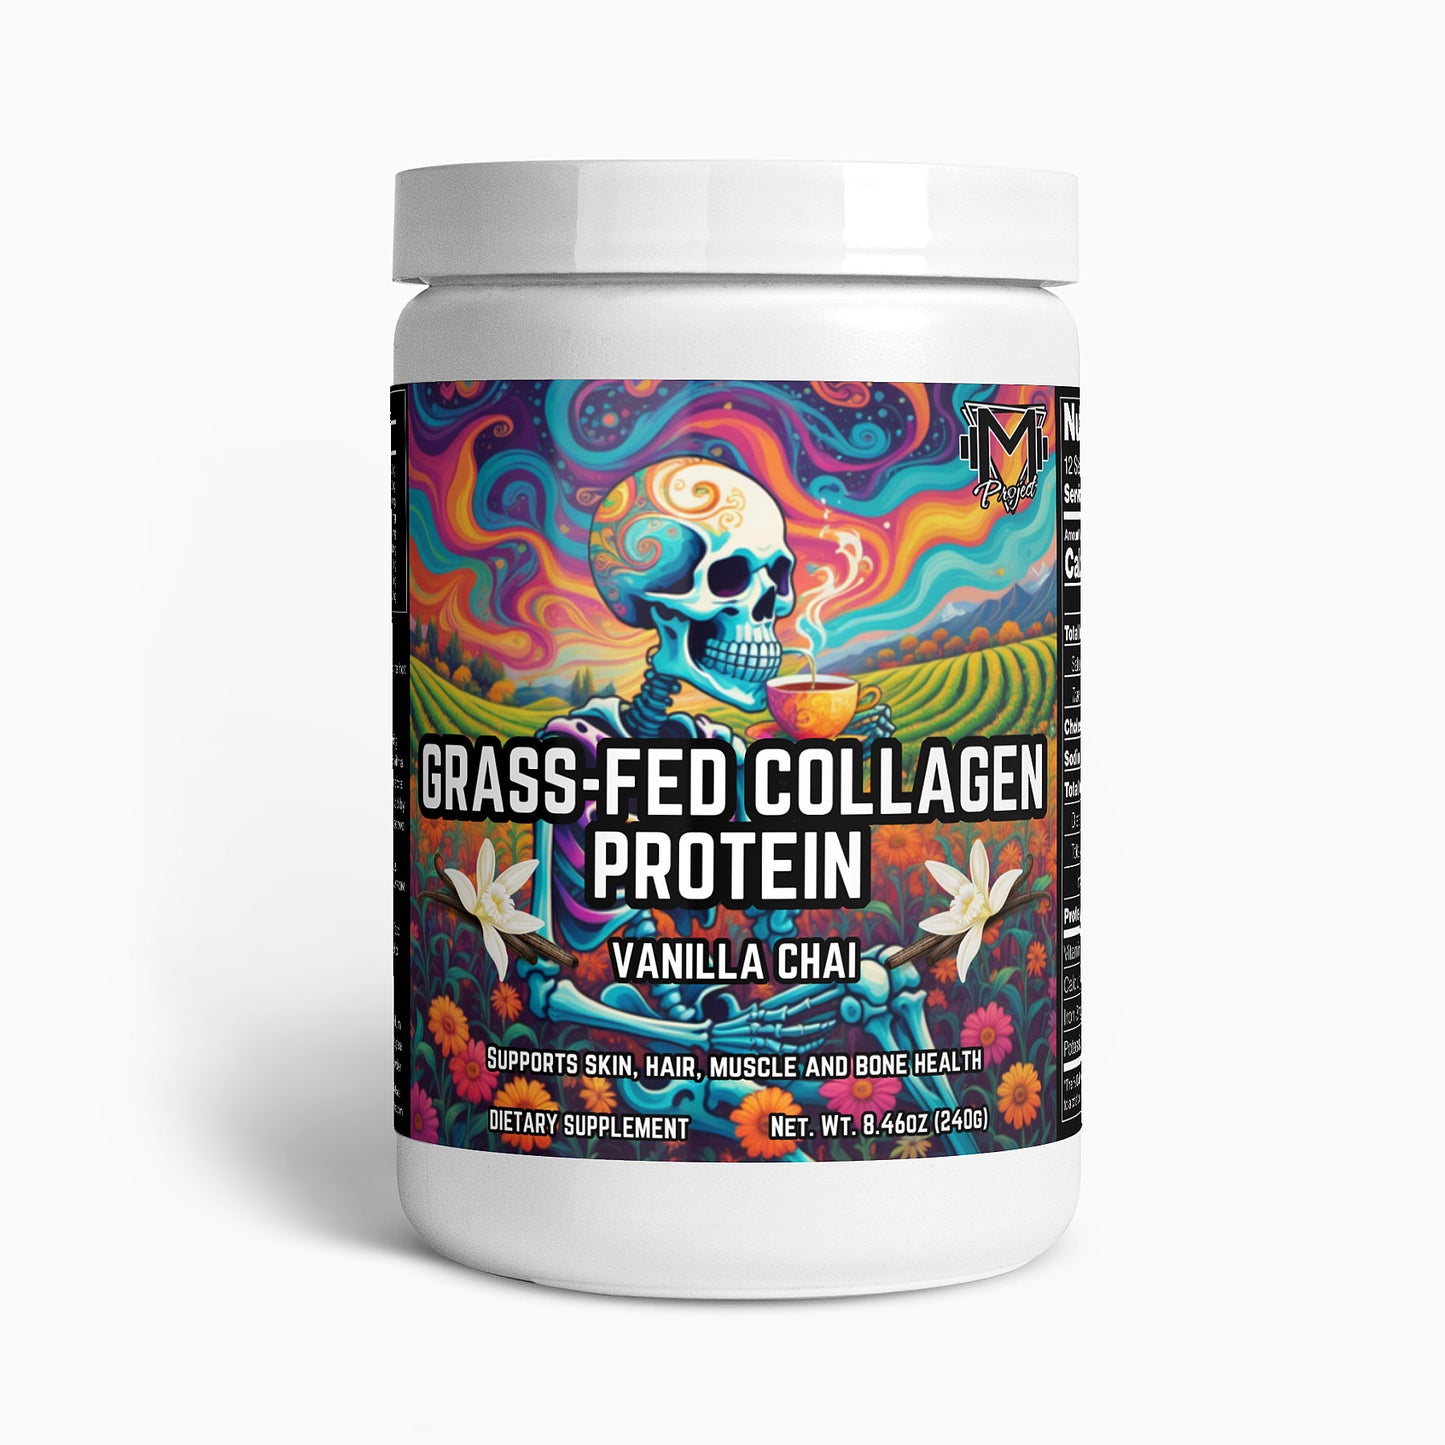 Grass-Fed Vanilla Chai Collagen Protein by Project M